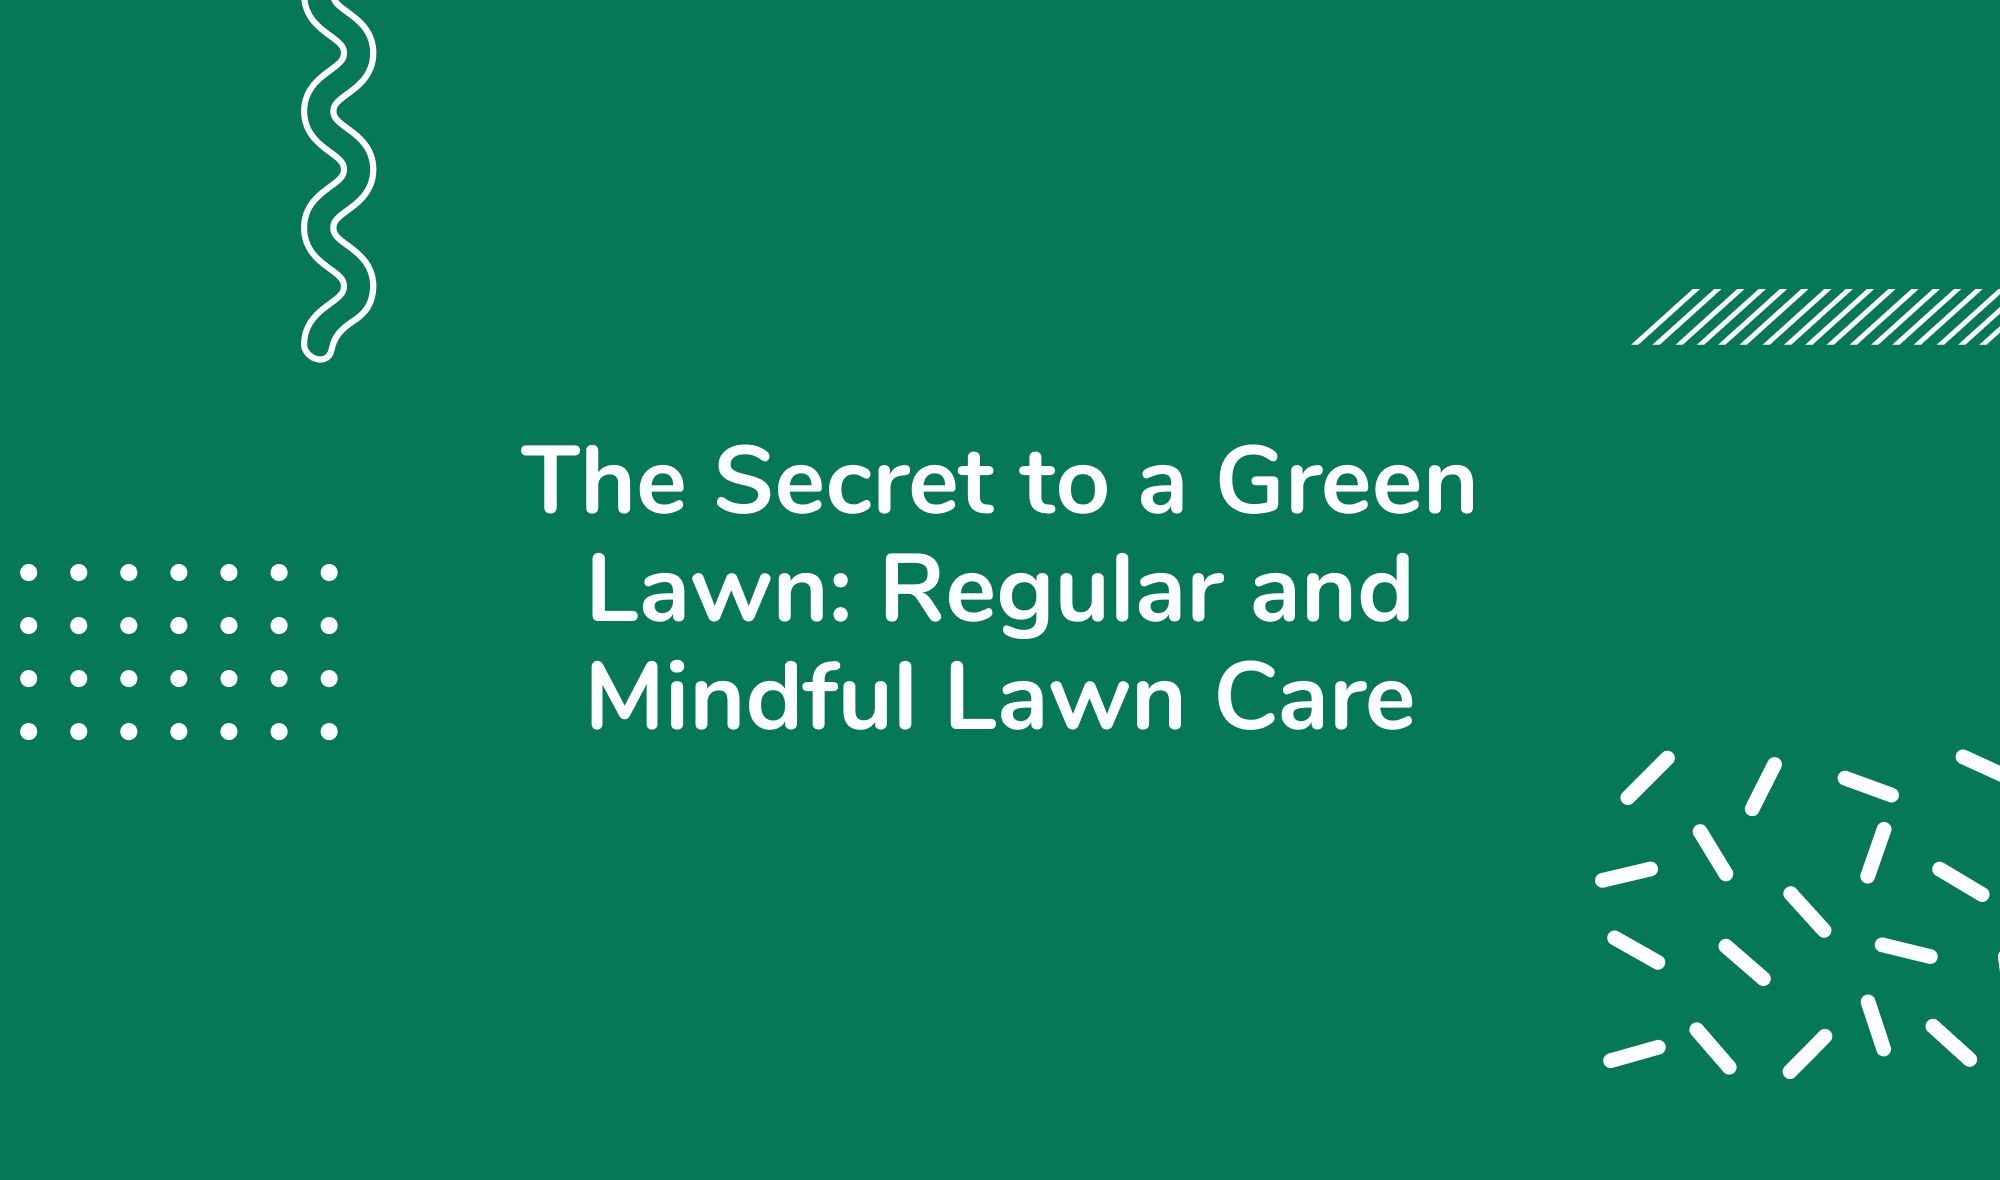 The Secret to a Green Lawn: Regular and Mindful Lawn Care